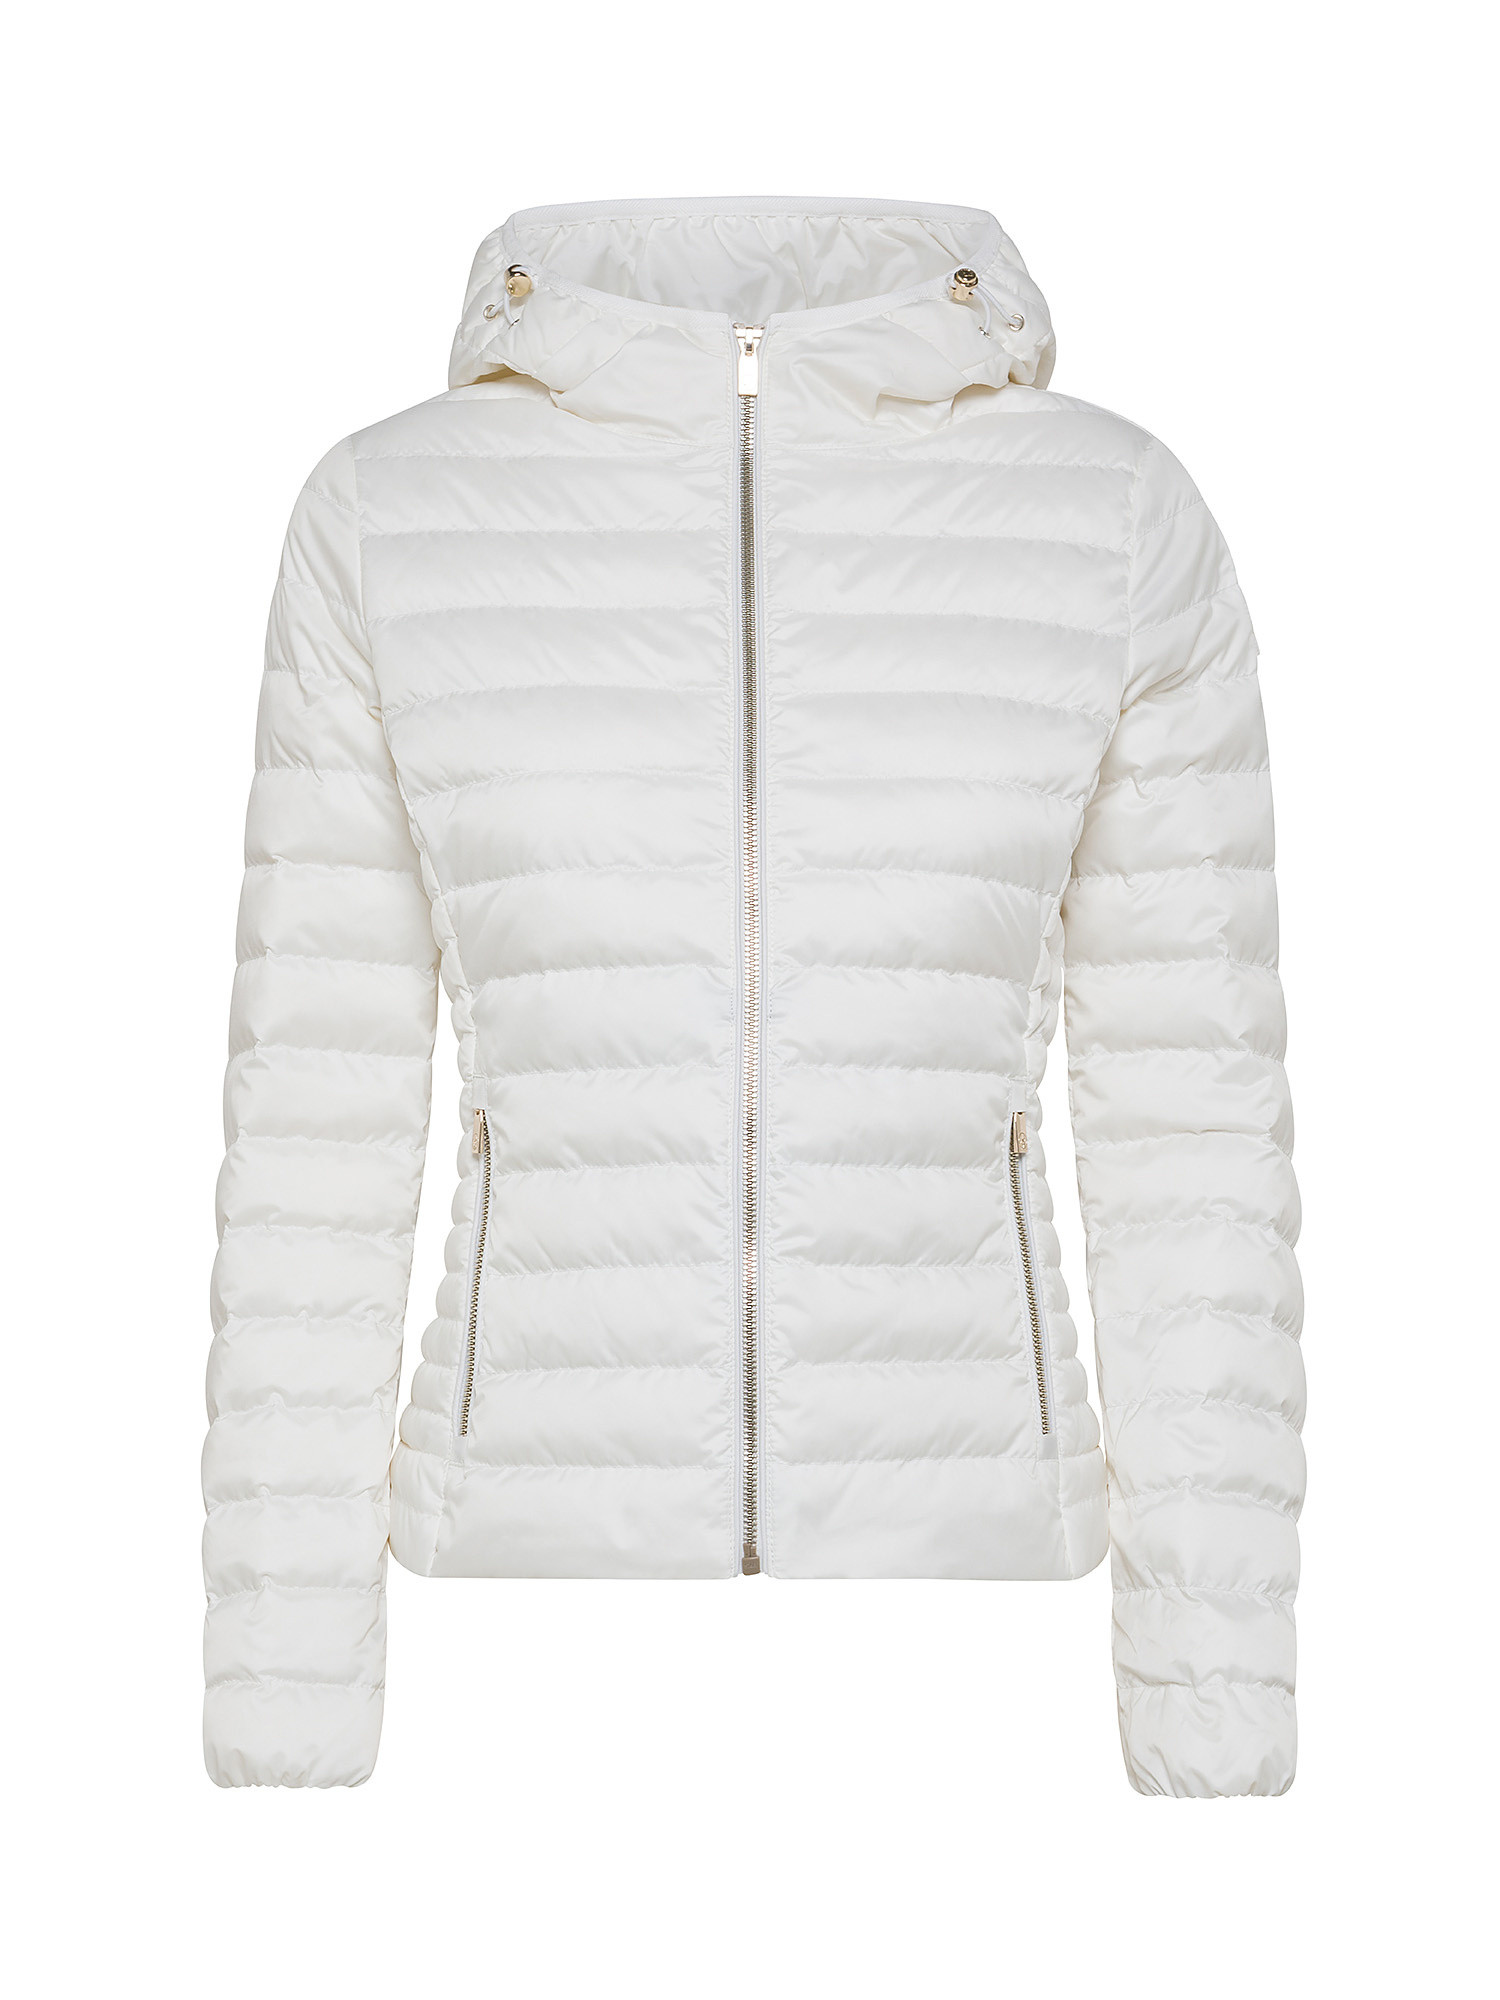 Ciesse Piumini - Carrie down jacket with hood, White, large image number 0